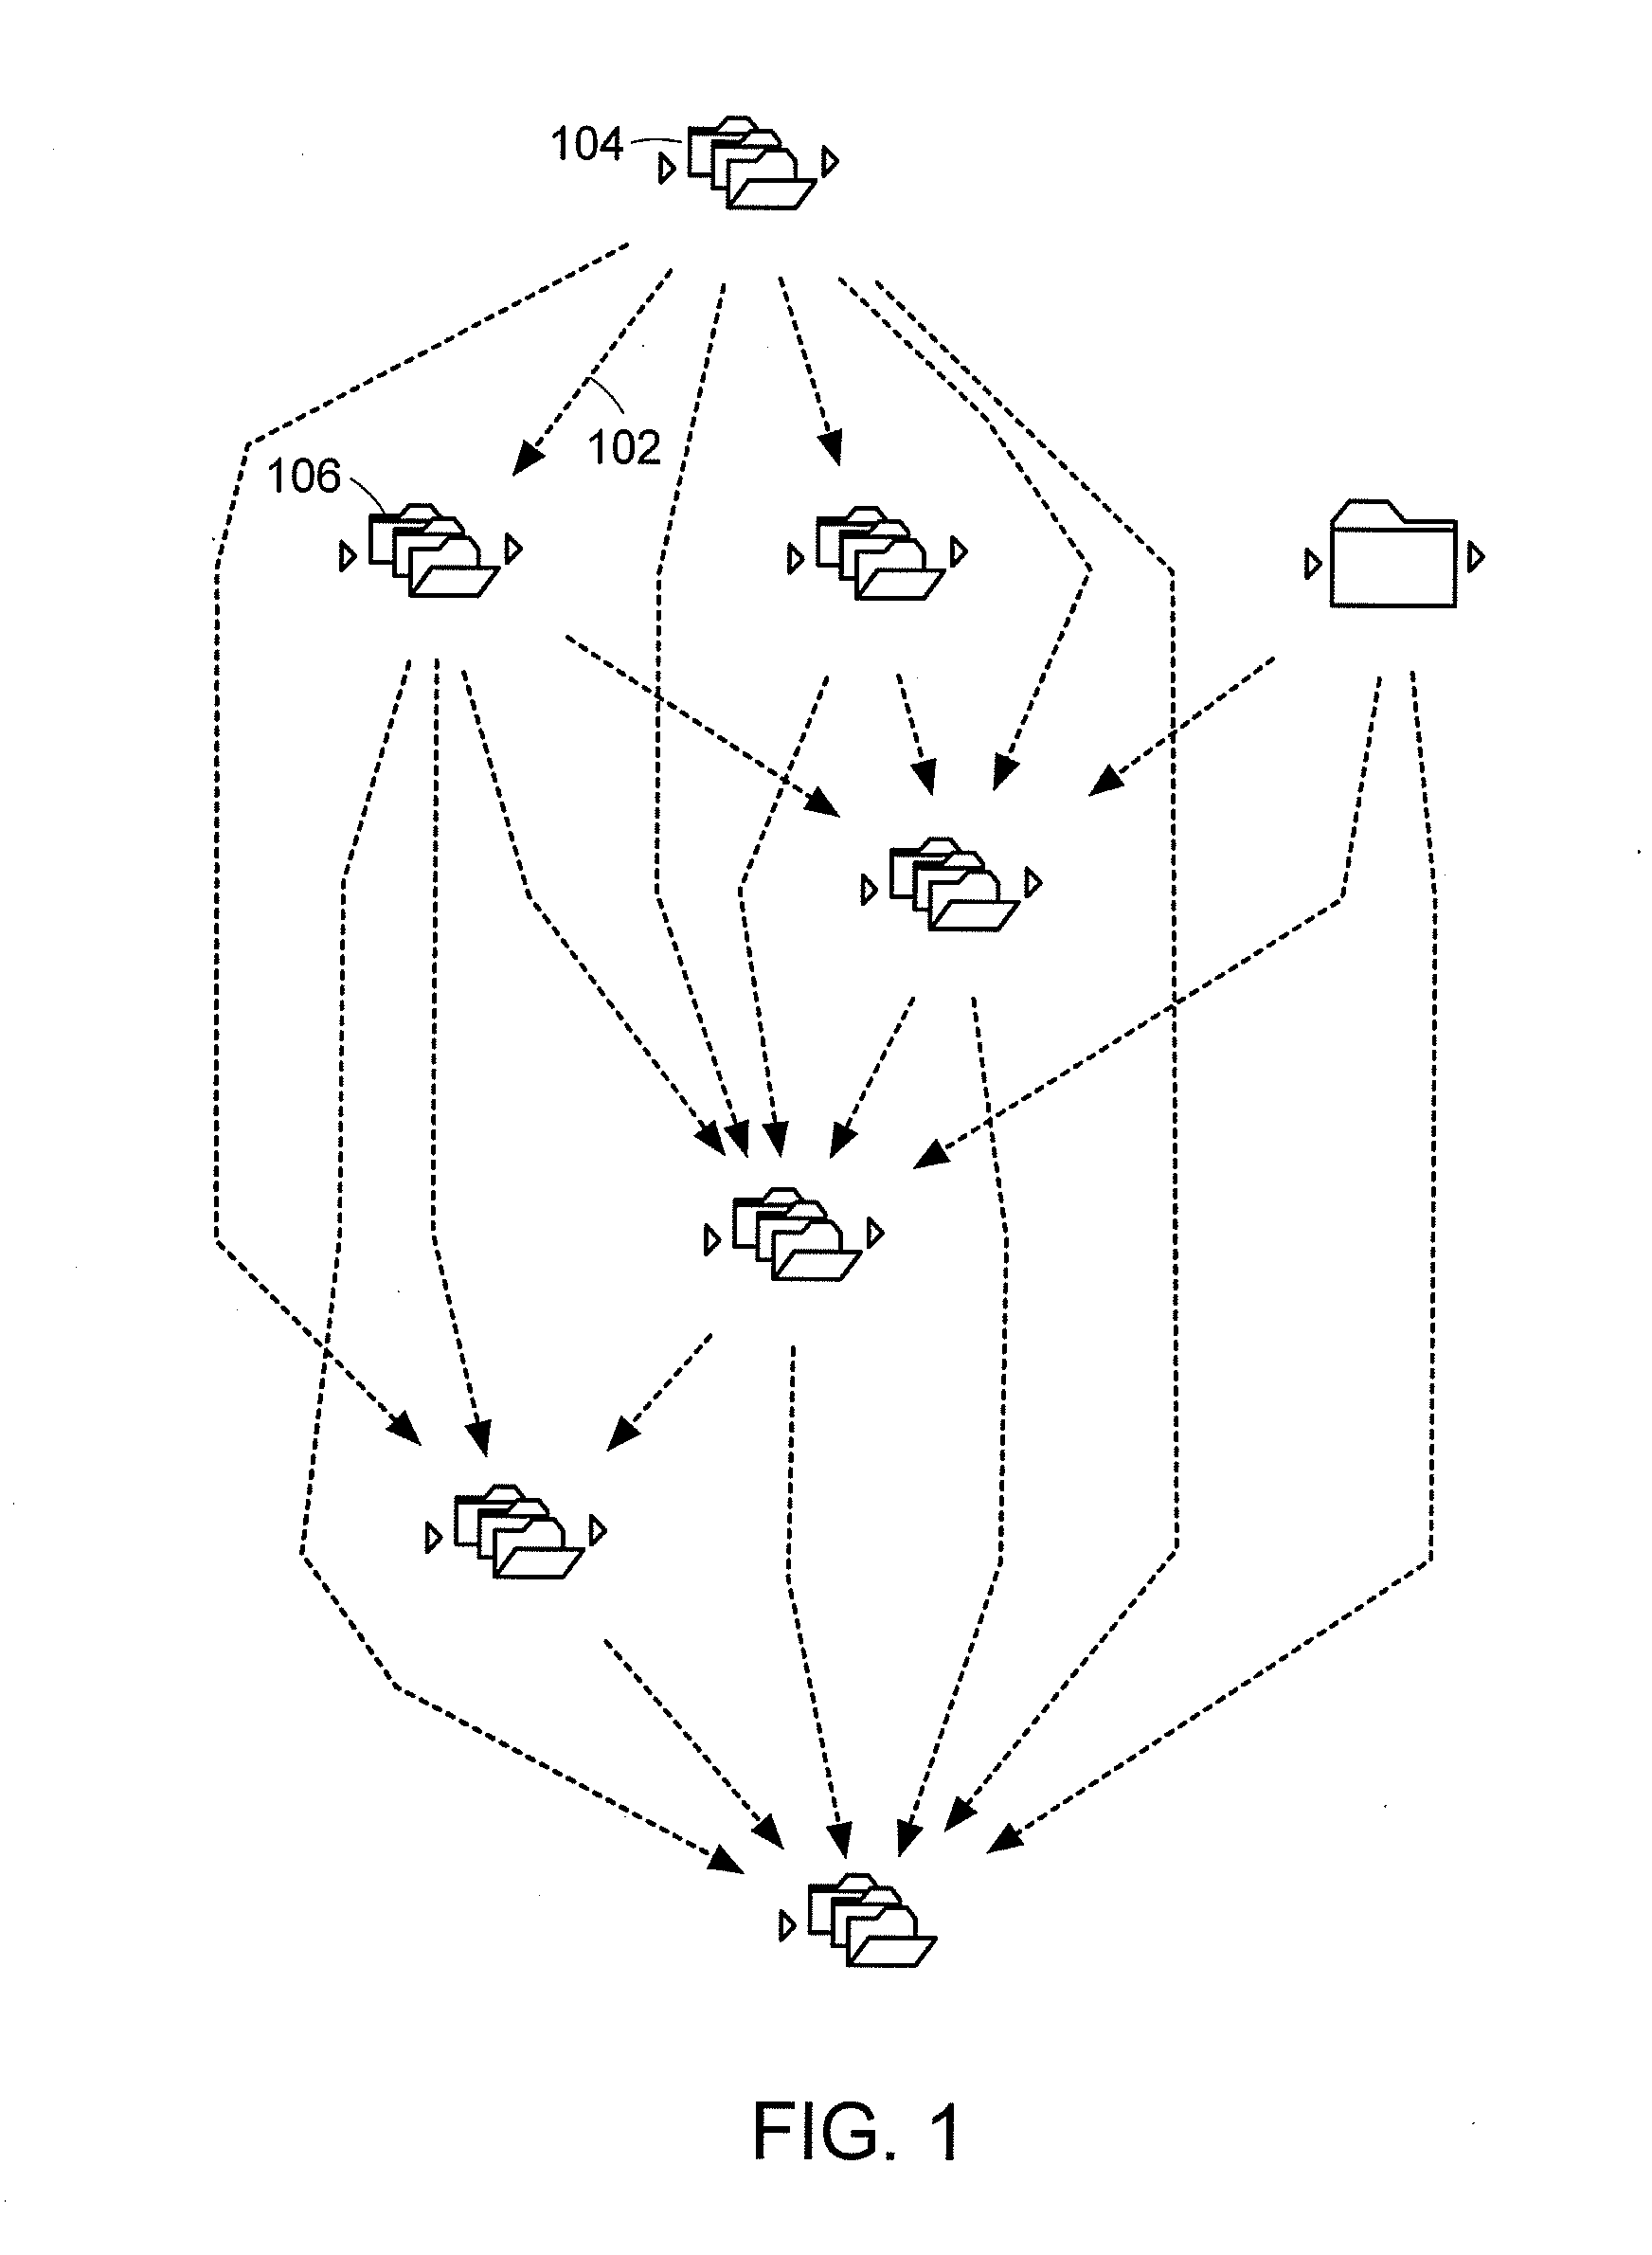 Apparatus and Methods for Displaying and Determining Dependency Relationships Among Subsystems in a Computer Software System